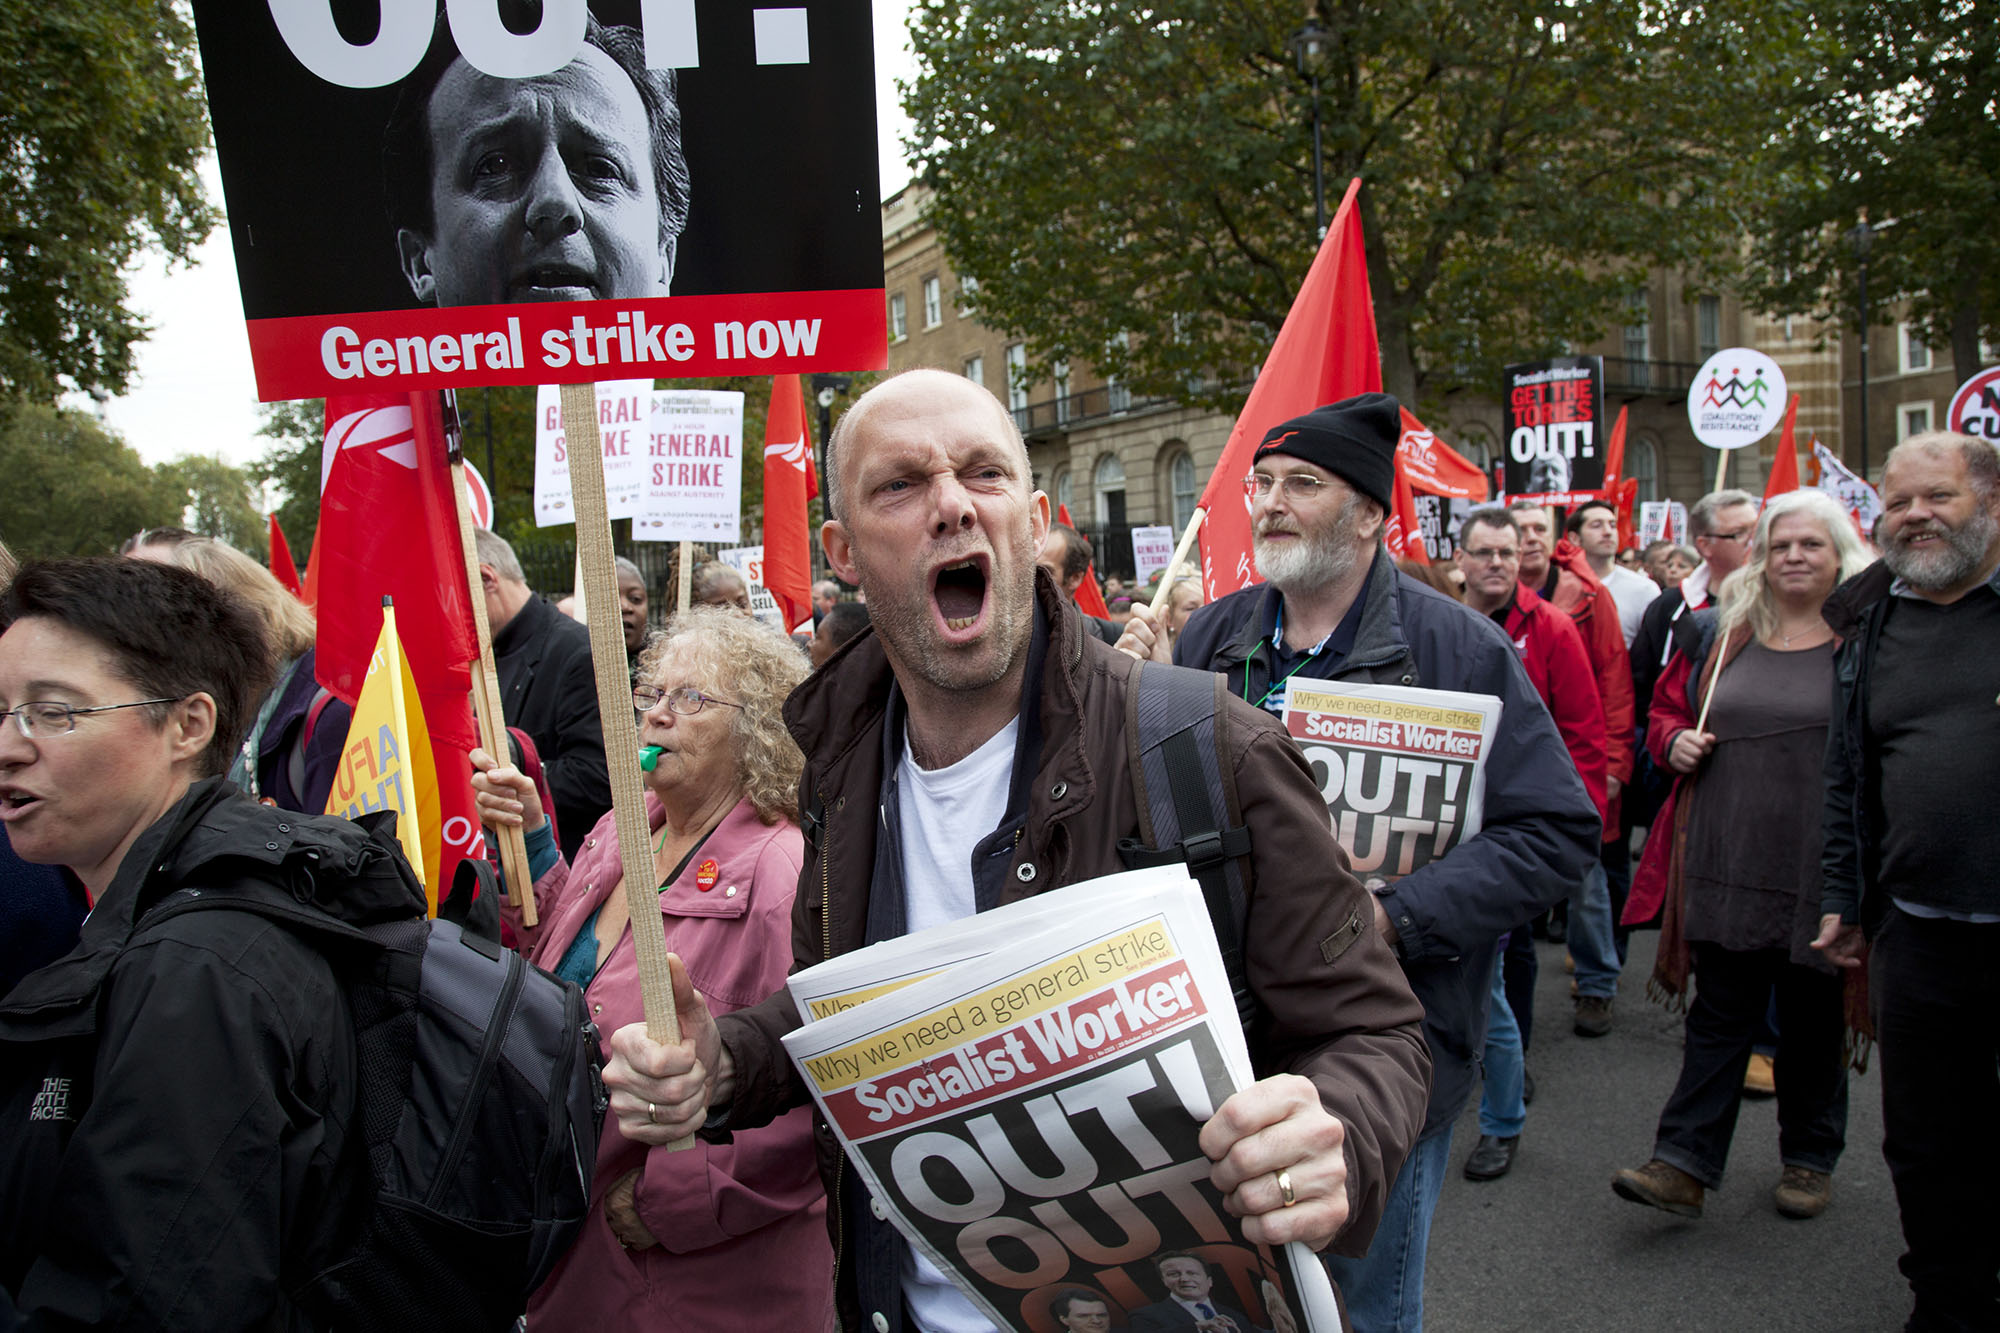  Protester shouts towards Downing Street during the TUC march 'A Future That Works' demonstration against austerity cuts. 